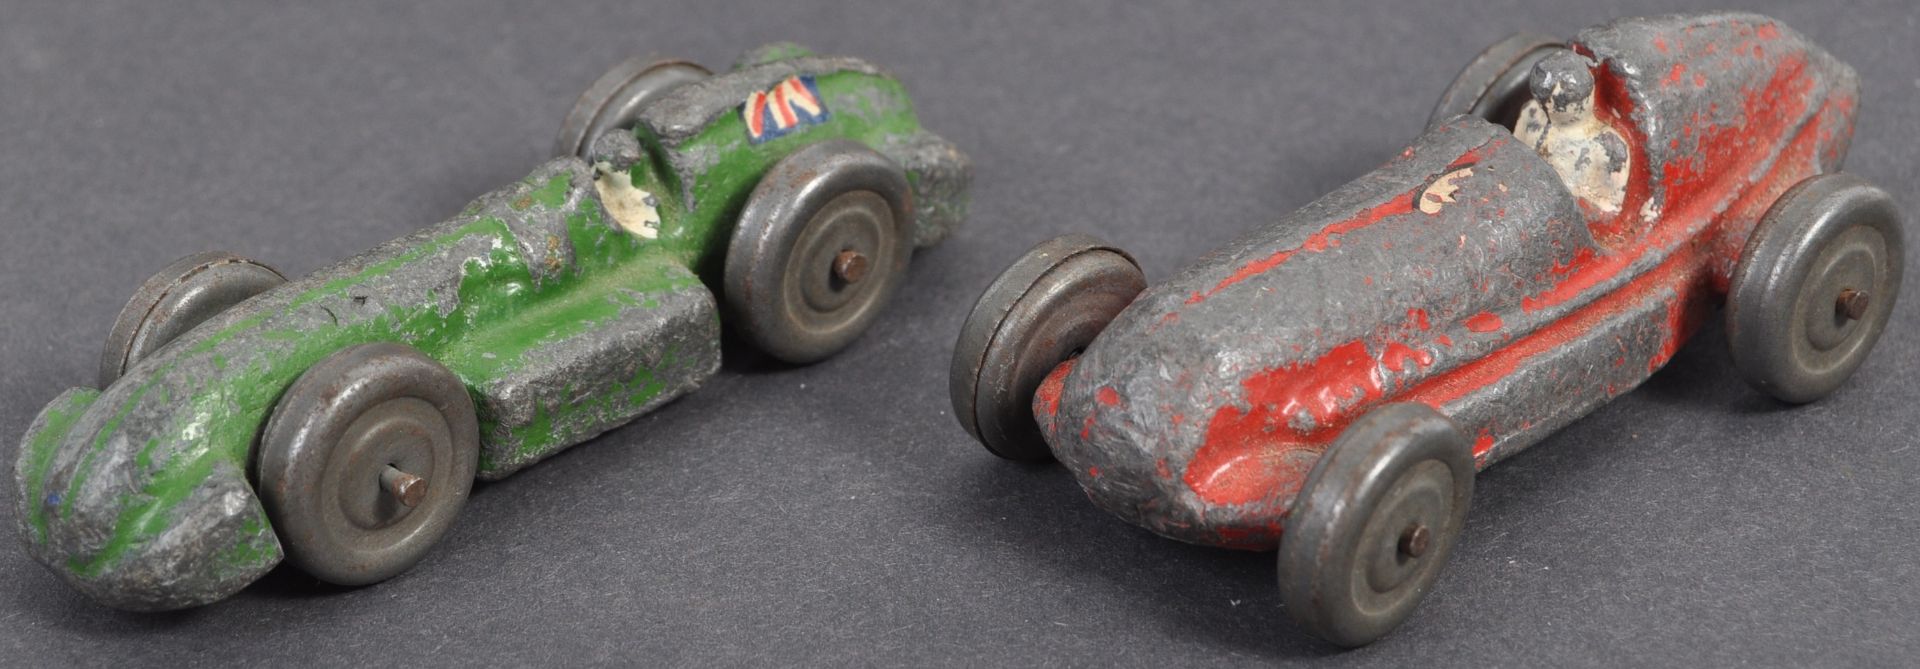 TWO ANTIQUE EARLY 19TH CENTURY ANTIQUE LEAD RACING CARS